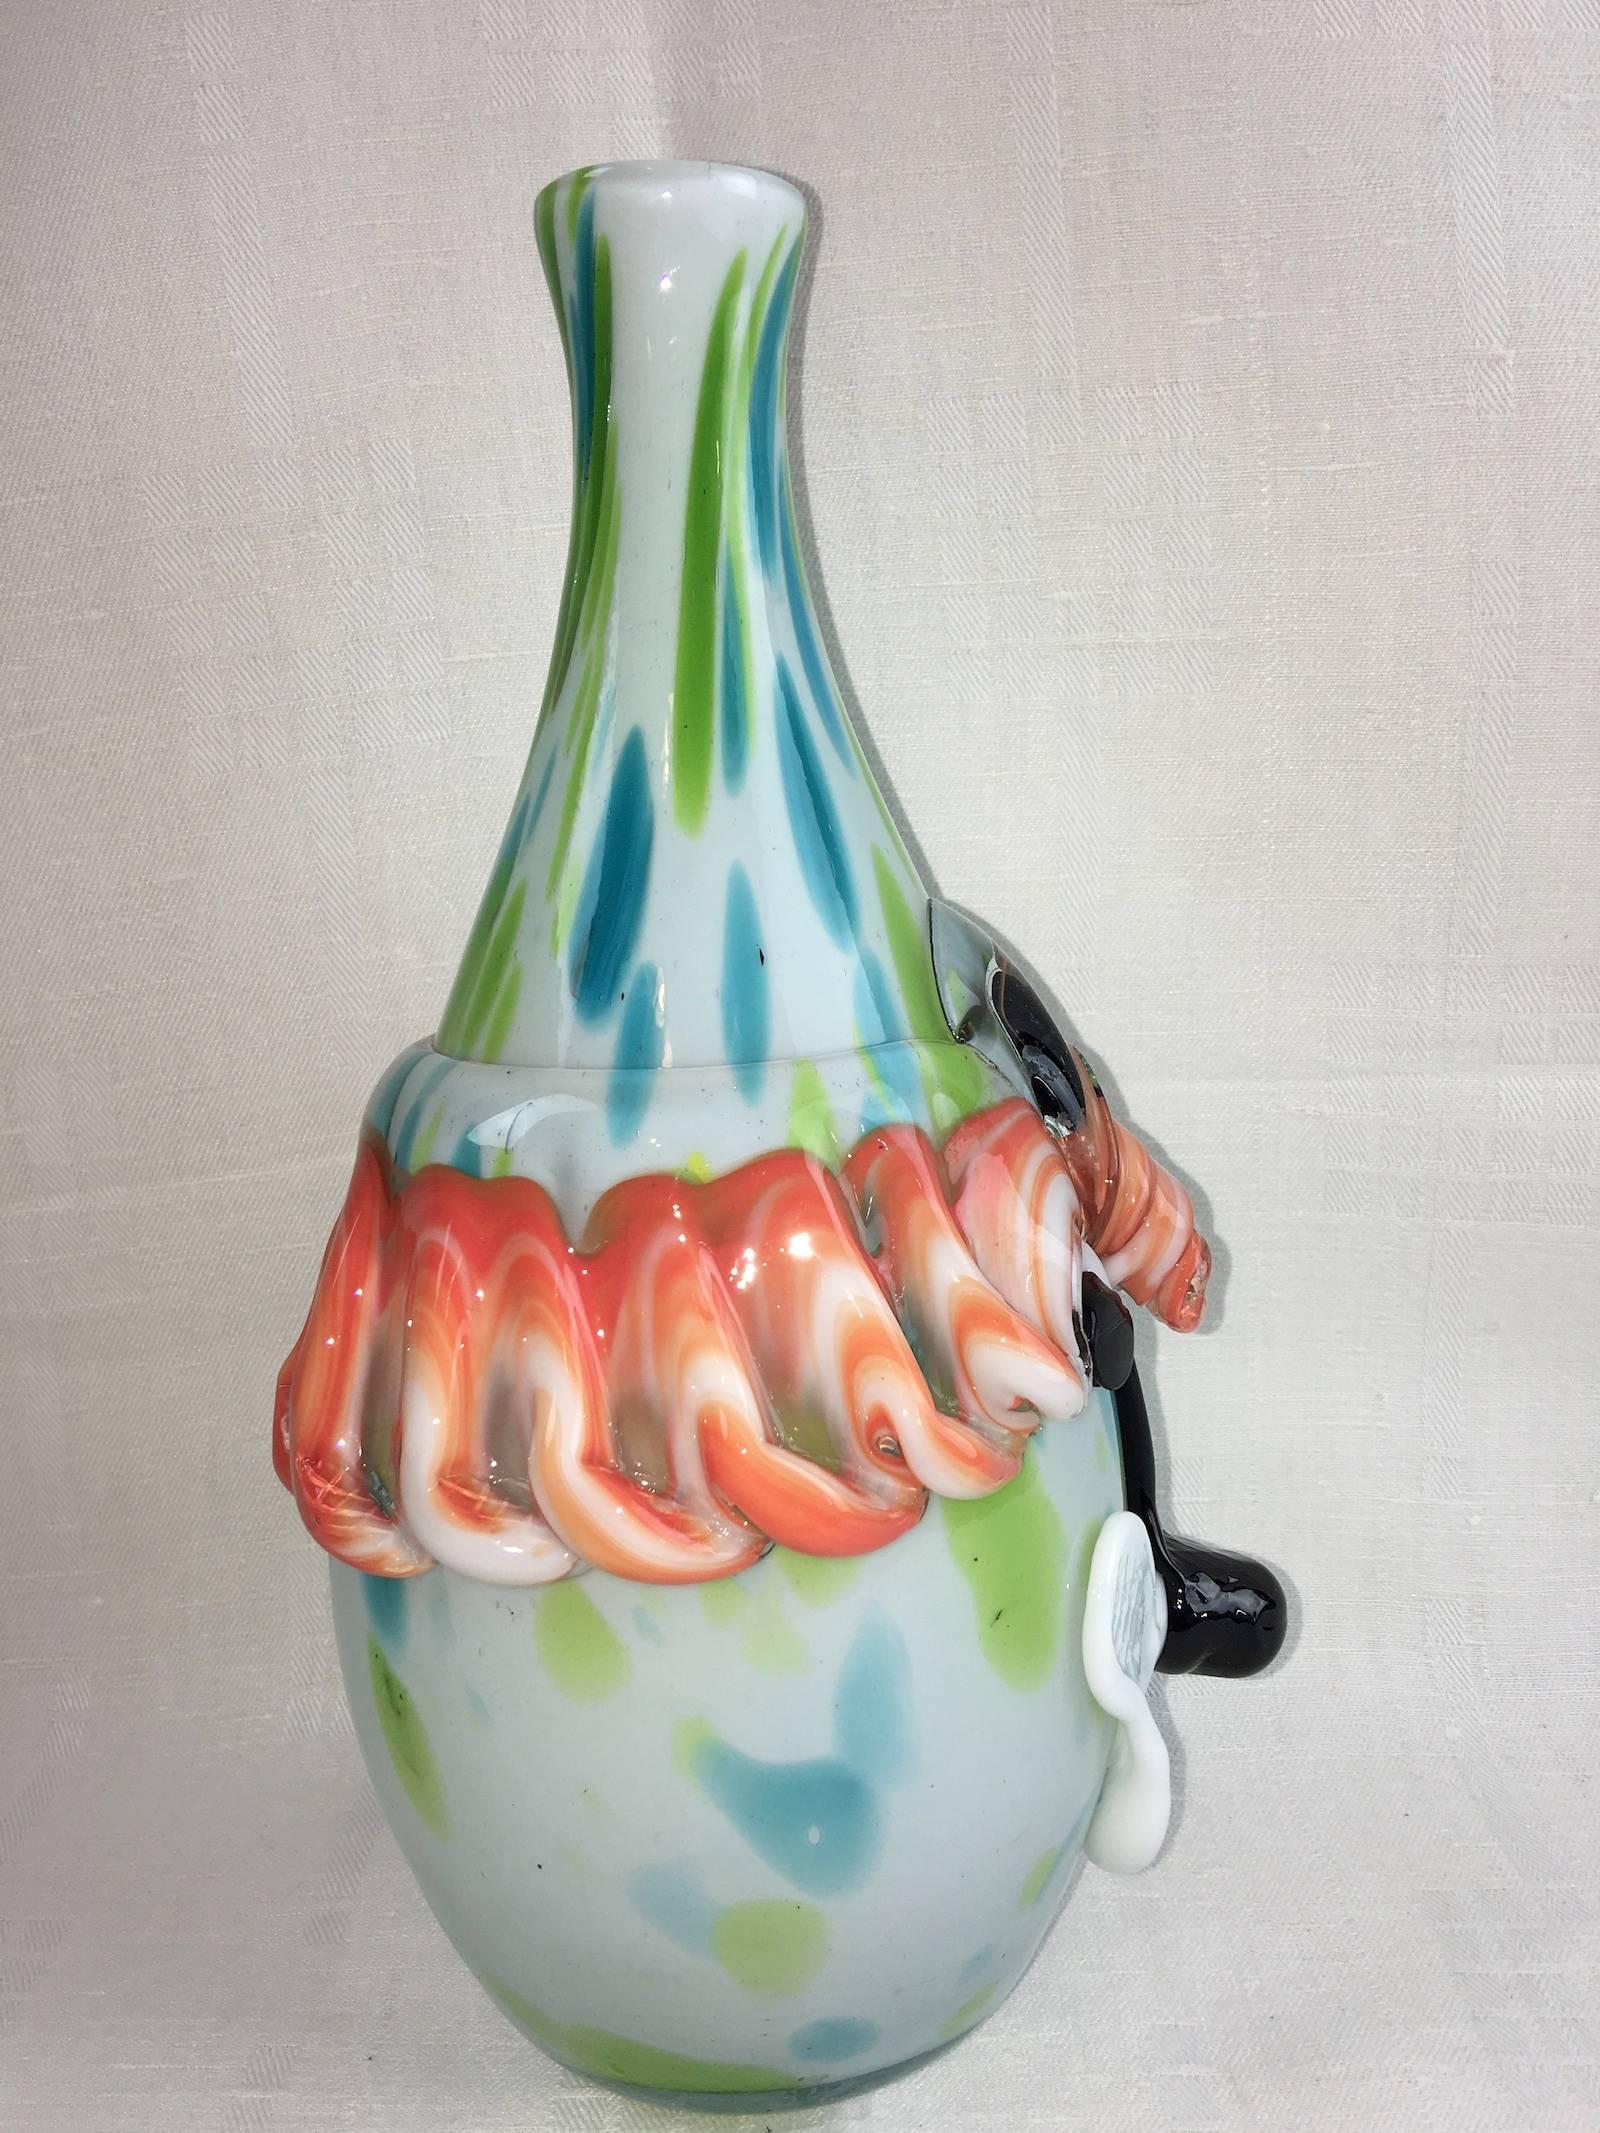 Fantastic Murano Sommerso M Badioli Style Picasso Art Glass Vase In Good Condition For Sale In Frisco, TX